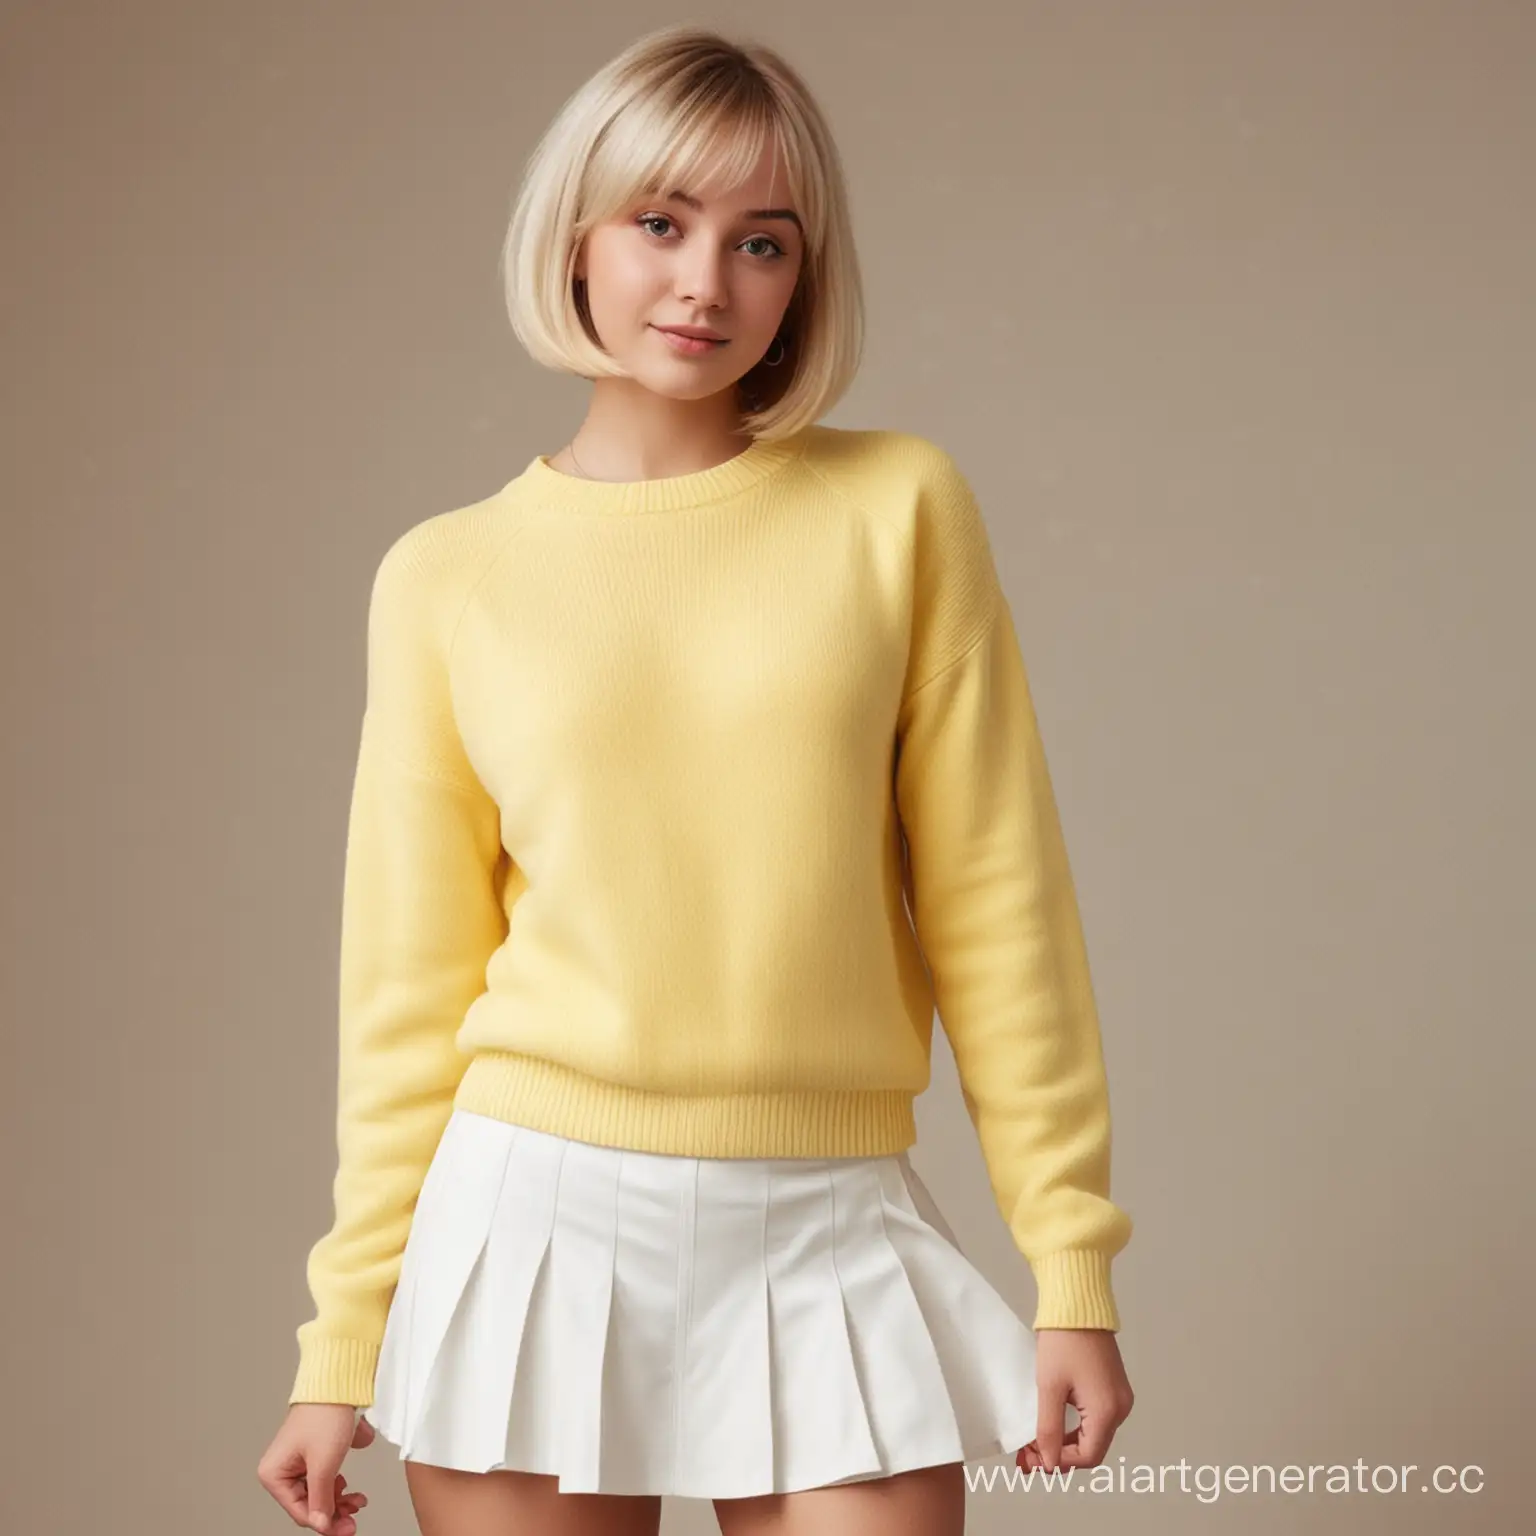 Adorable-18YearOld-Blonde-Girl-in-White-Skirt-and-Yellow-Sweater